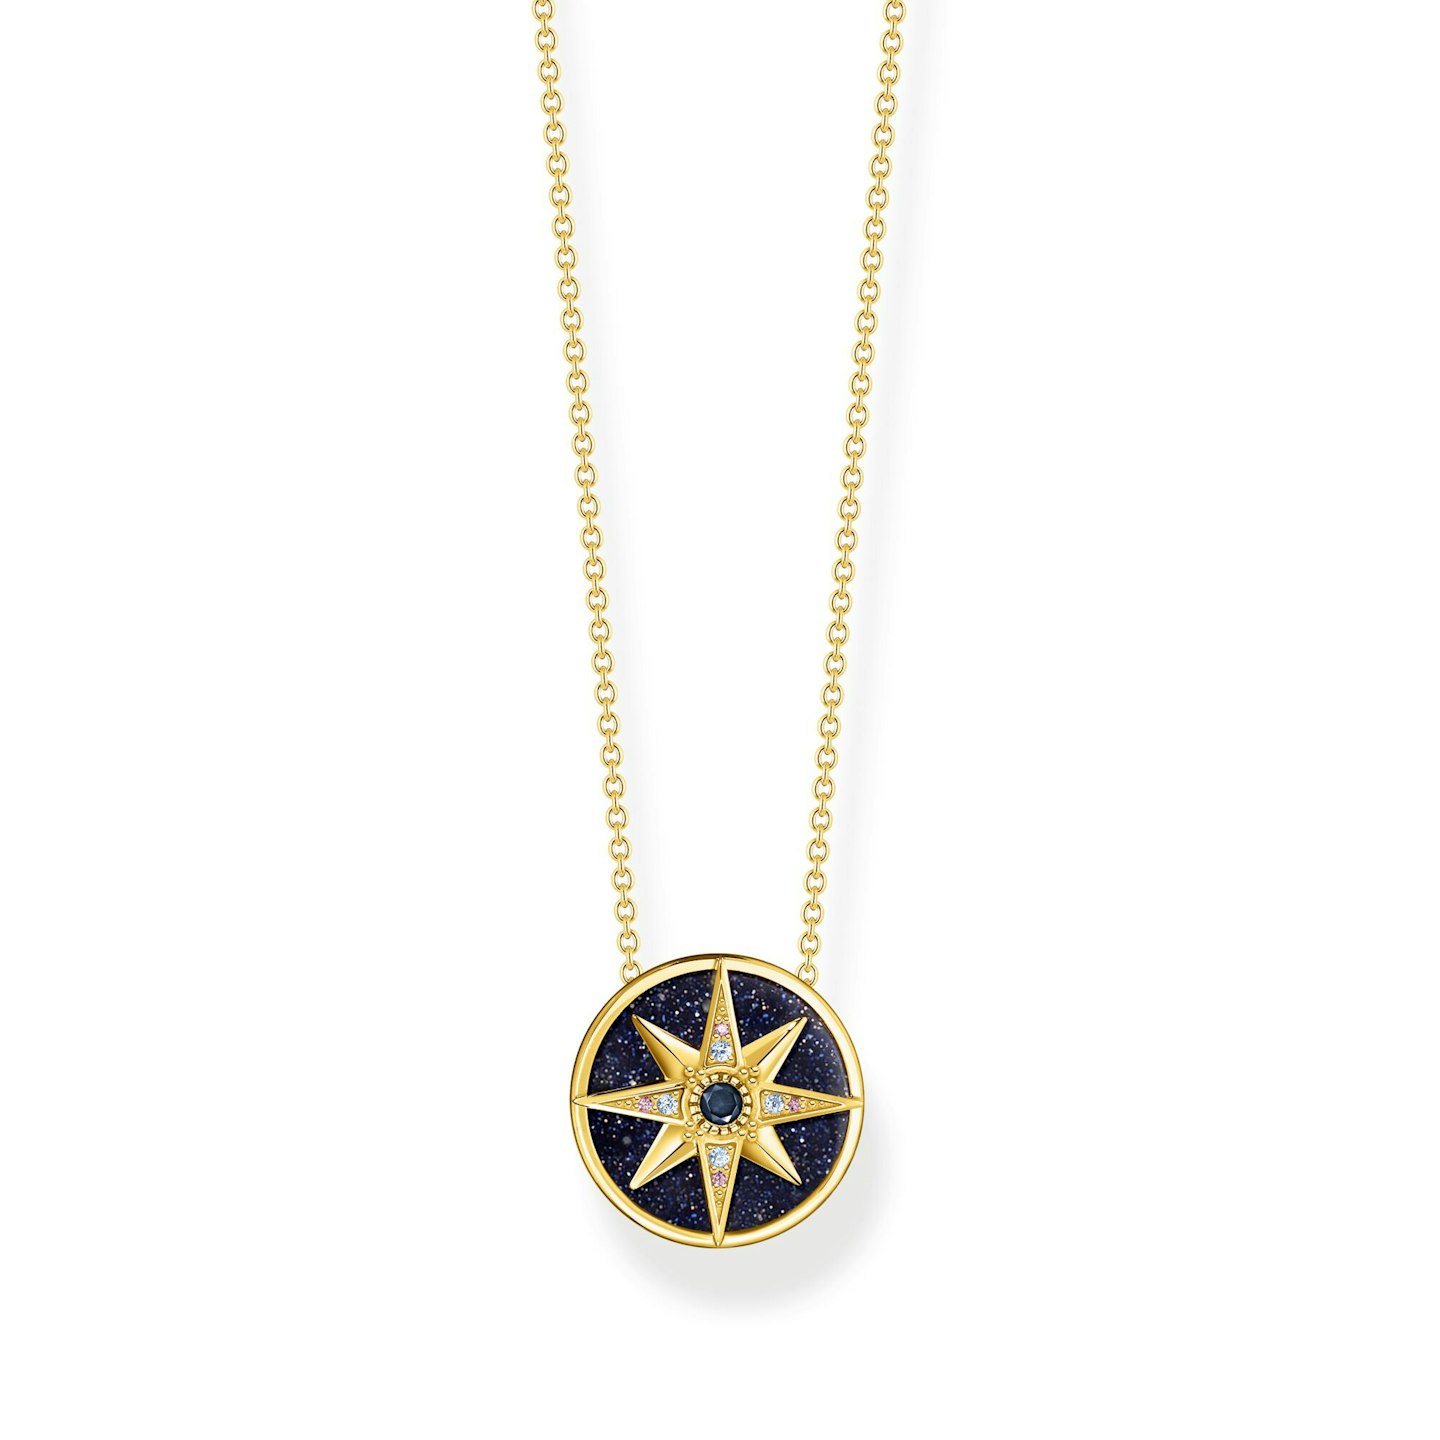 Star Necklace with Gold Stones, £198